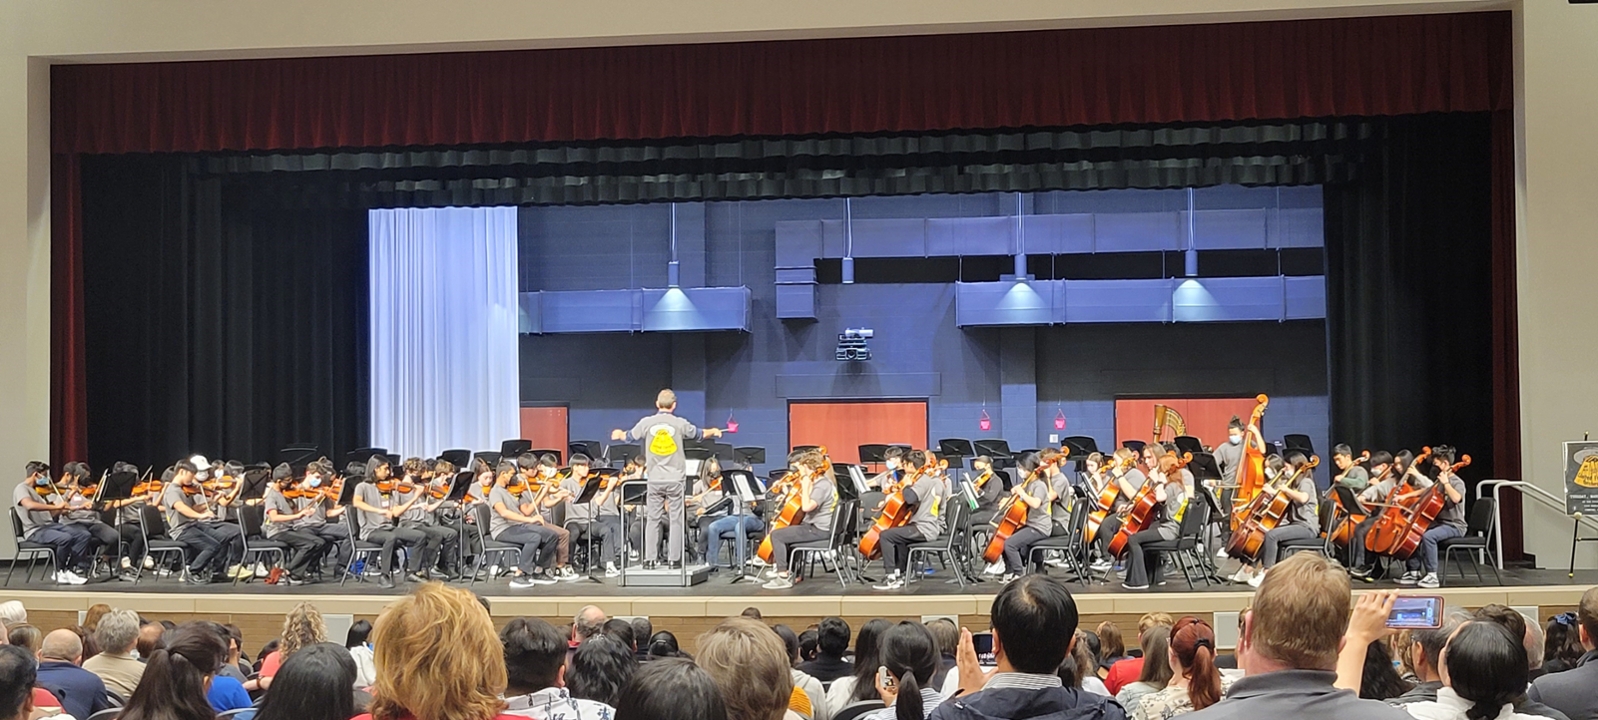 Faculty and students assist with orchestra